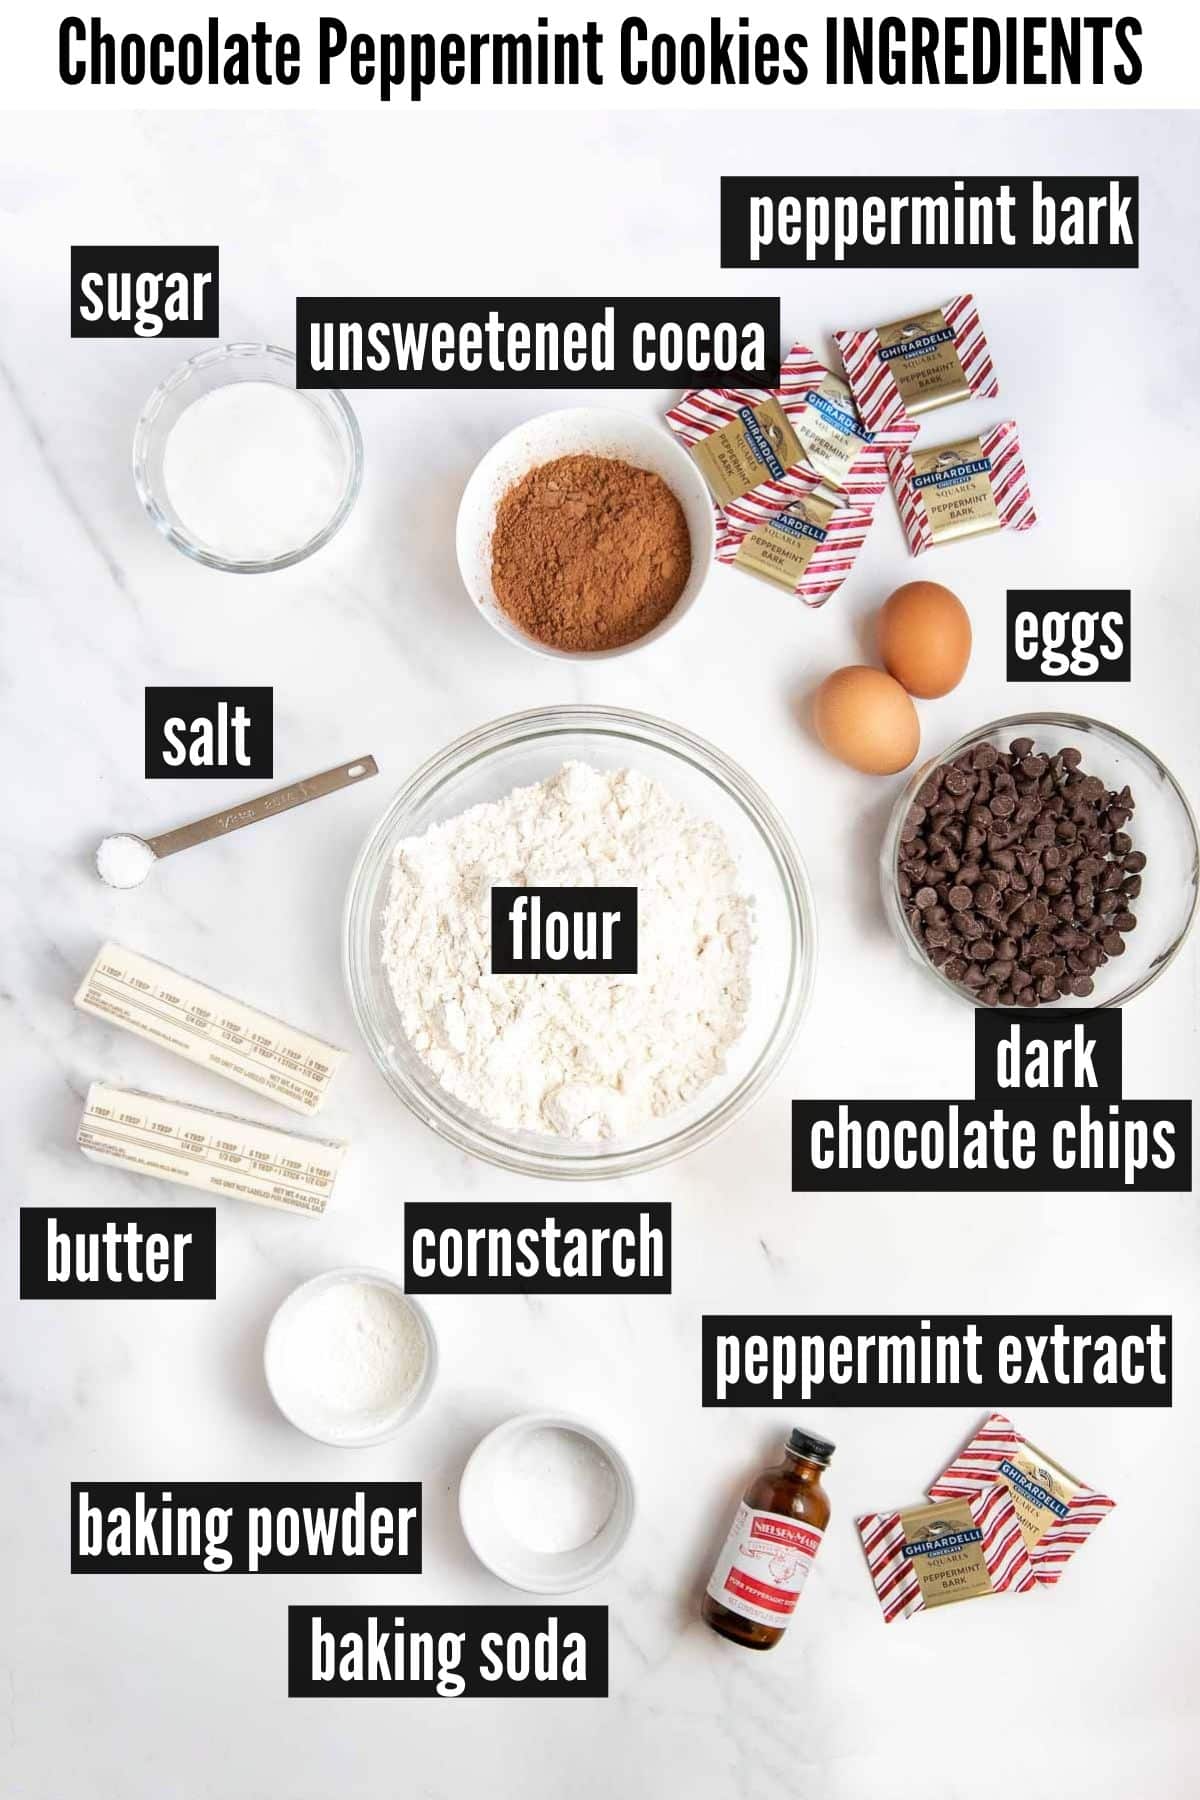 chocolate peppermint cookies labelled ingredients